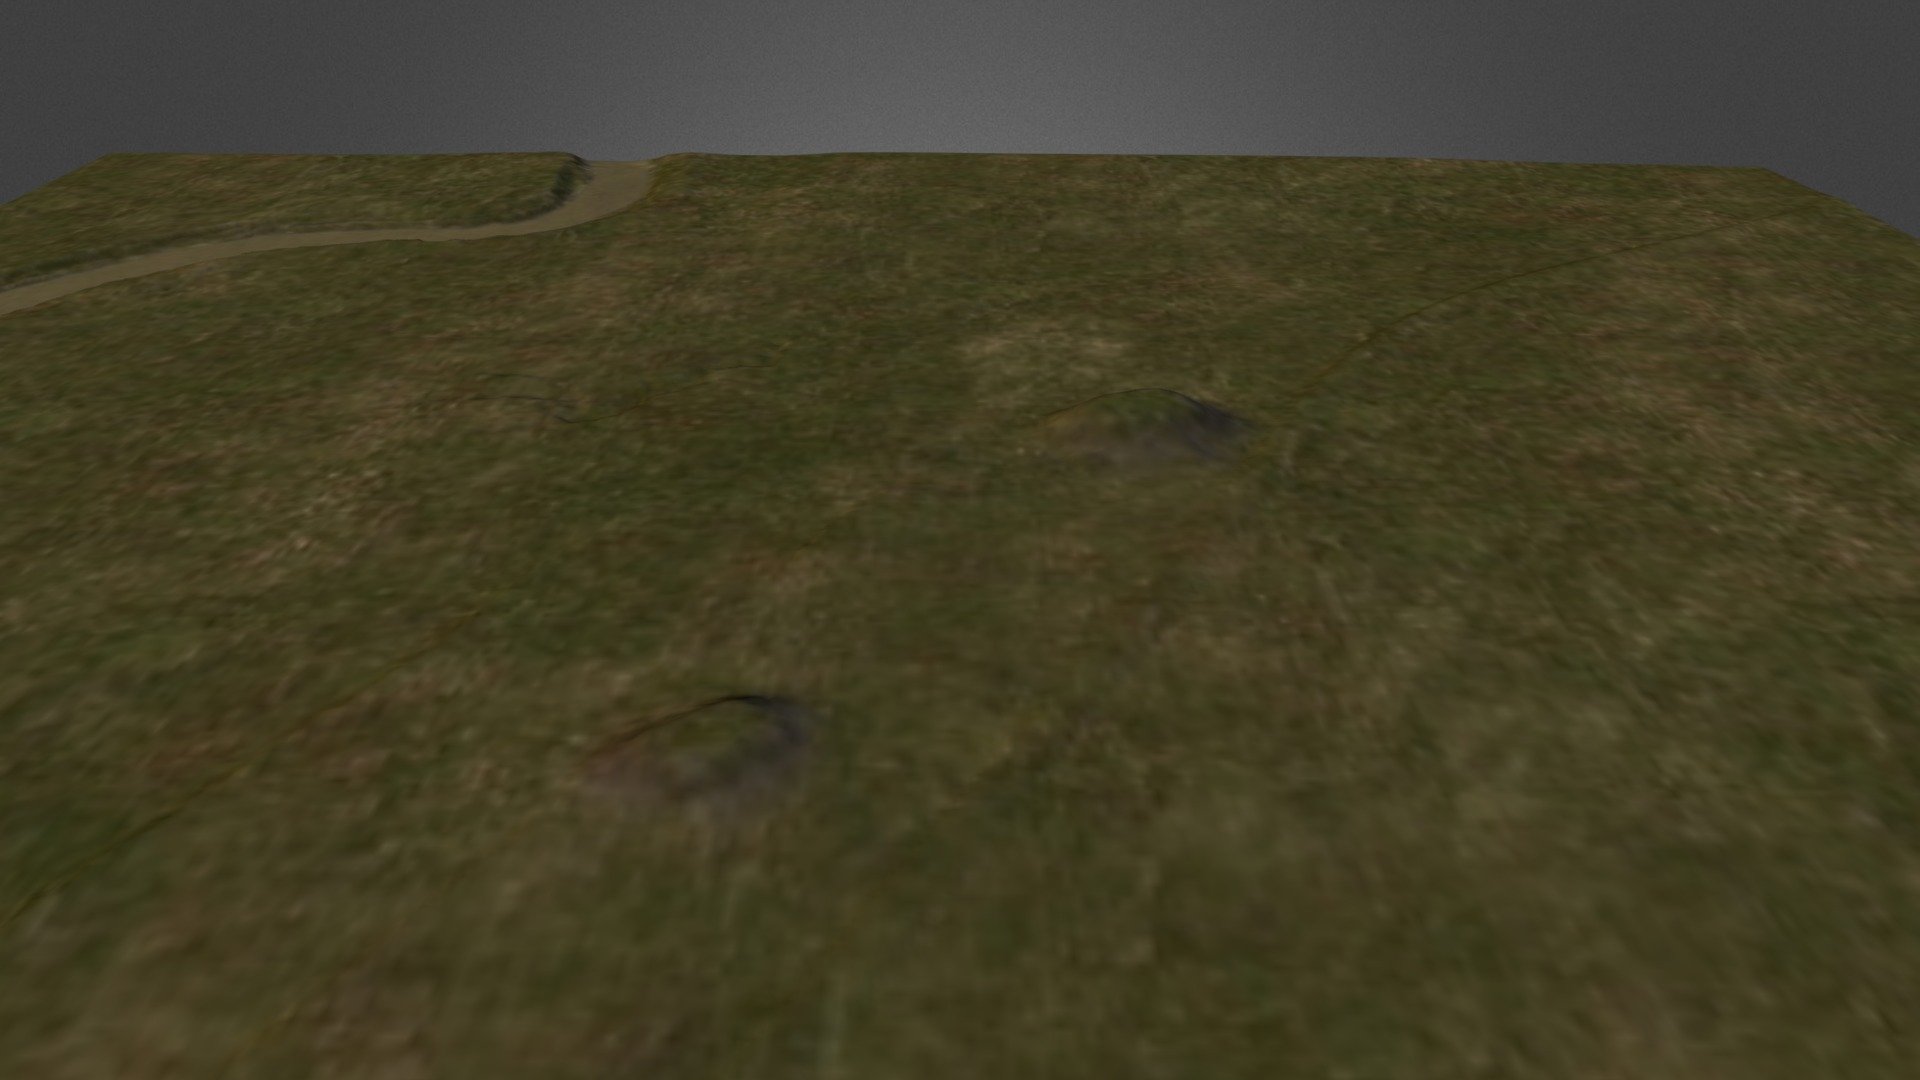 Simple terrain model of Grace Mound site in Mississippi. Created in L3DT from DEM data exported from ArcMap 3d model